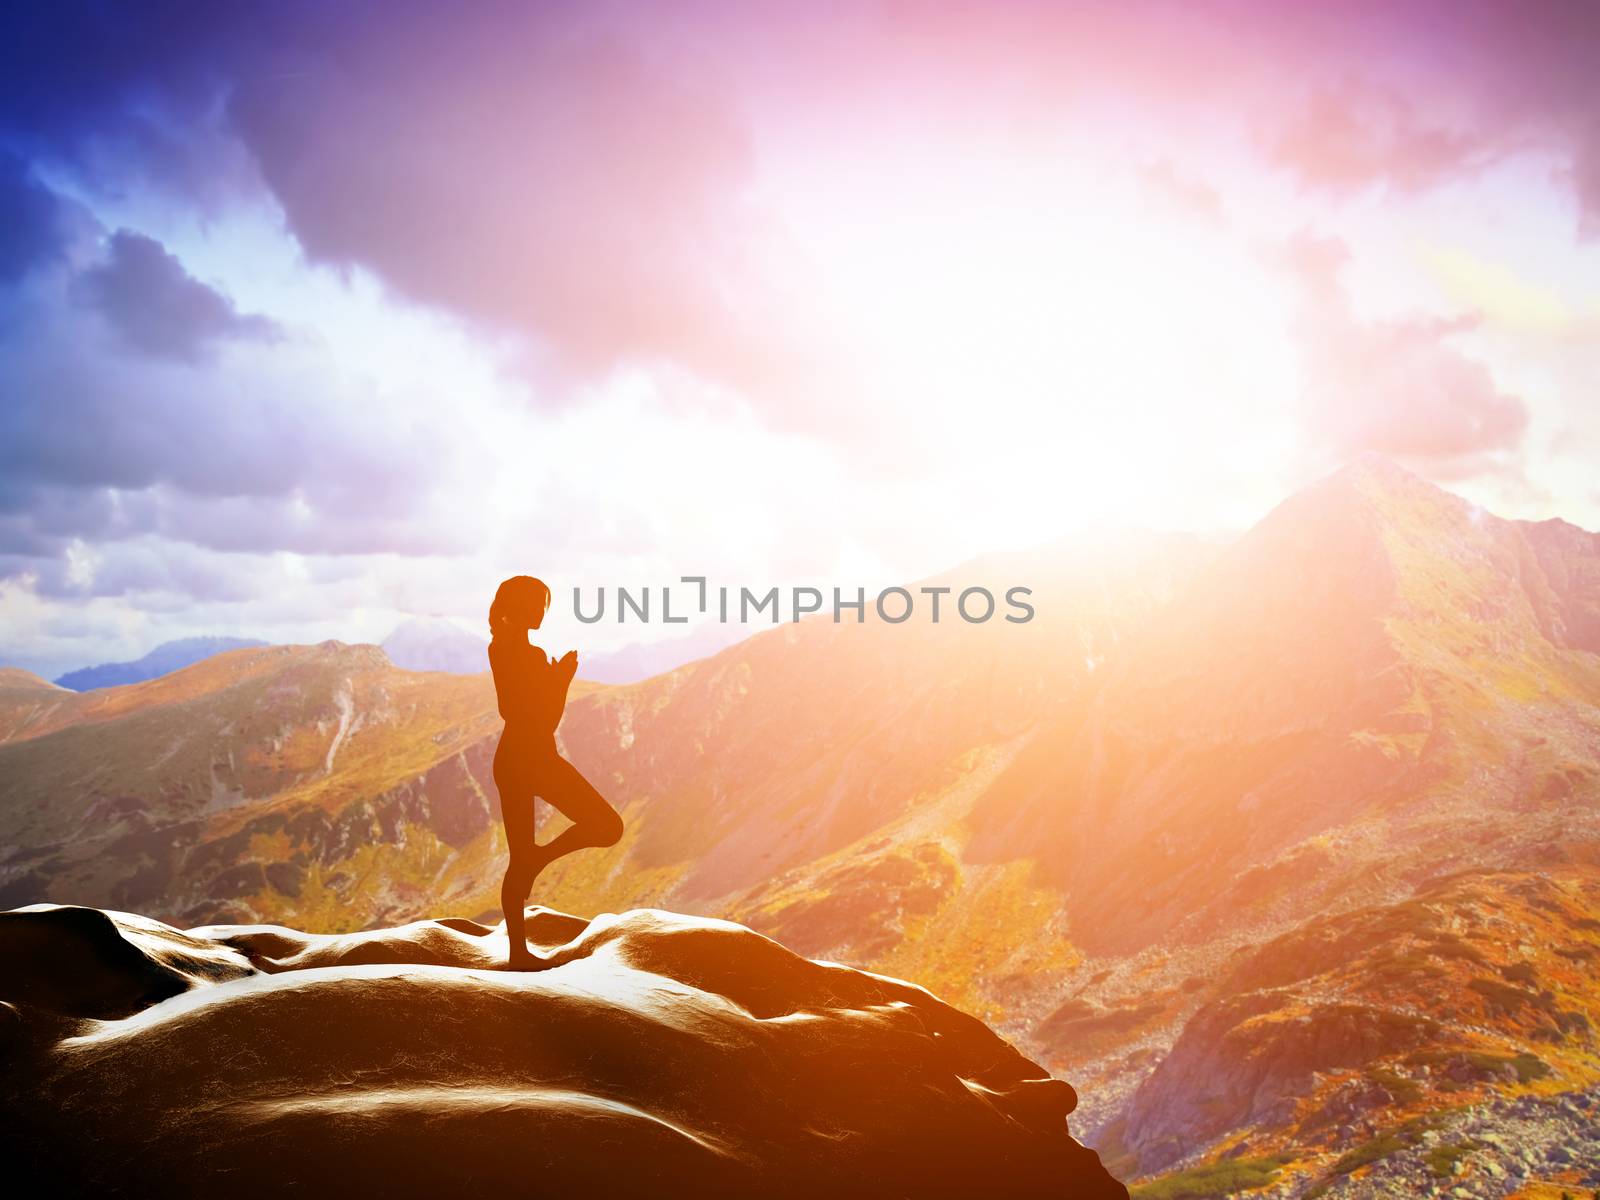 Woman standing in tree yoga position, meditating on rock in mountains at sunset. Zen, meditation, peace